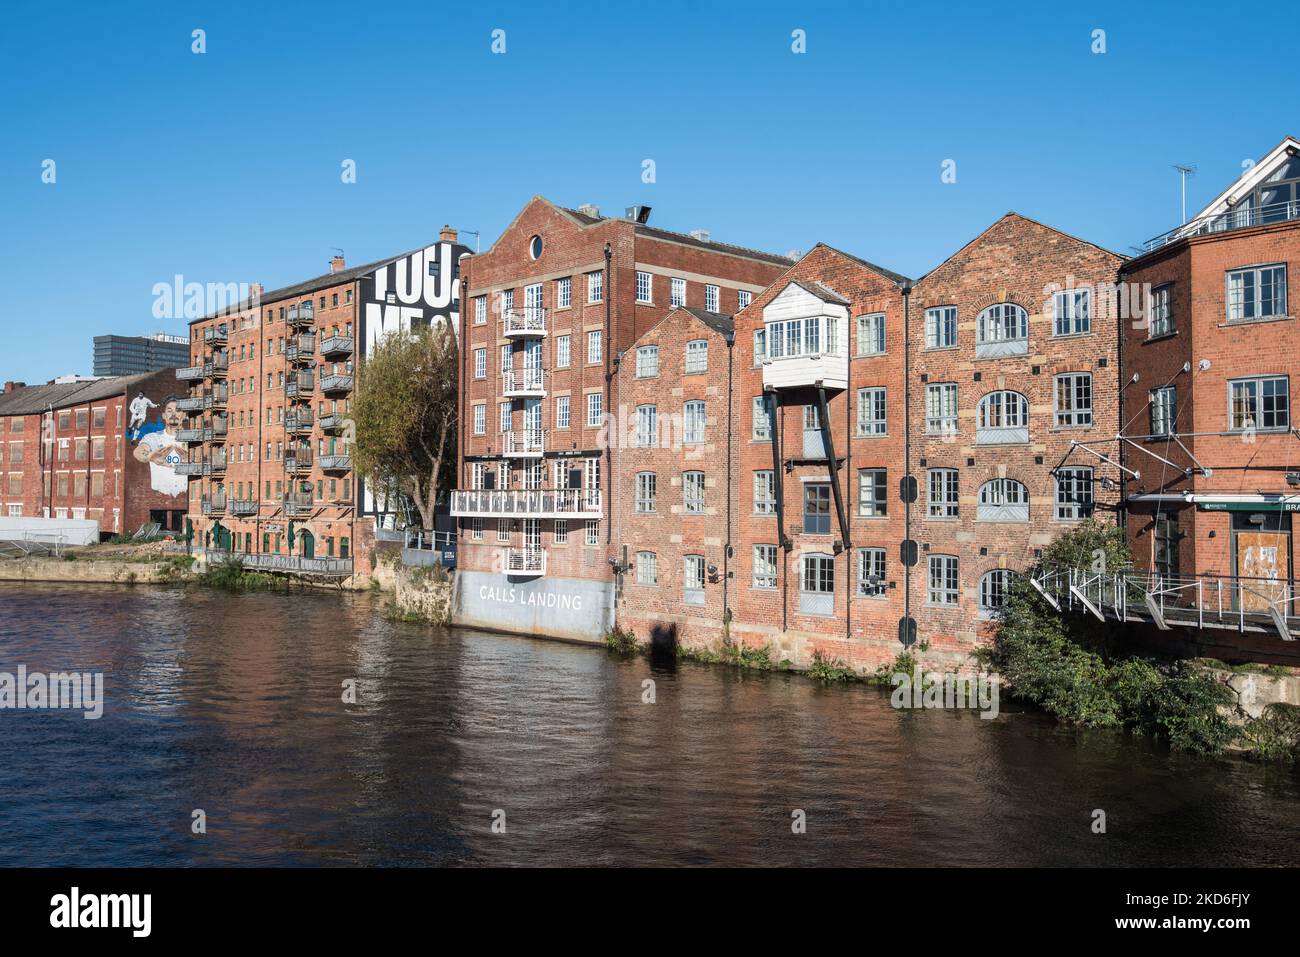 The waterfront on the Leeds & Liverpool canal at Leeds at Calls Landing Stock Photo